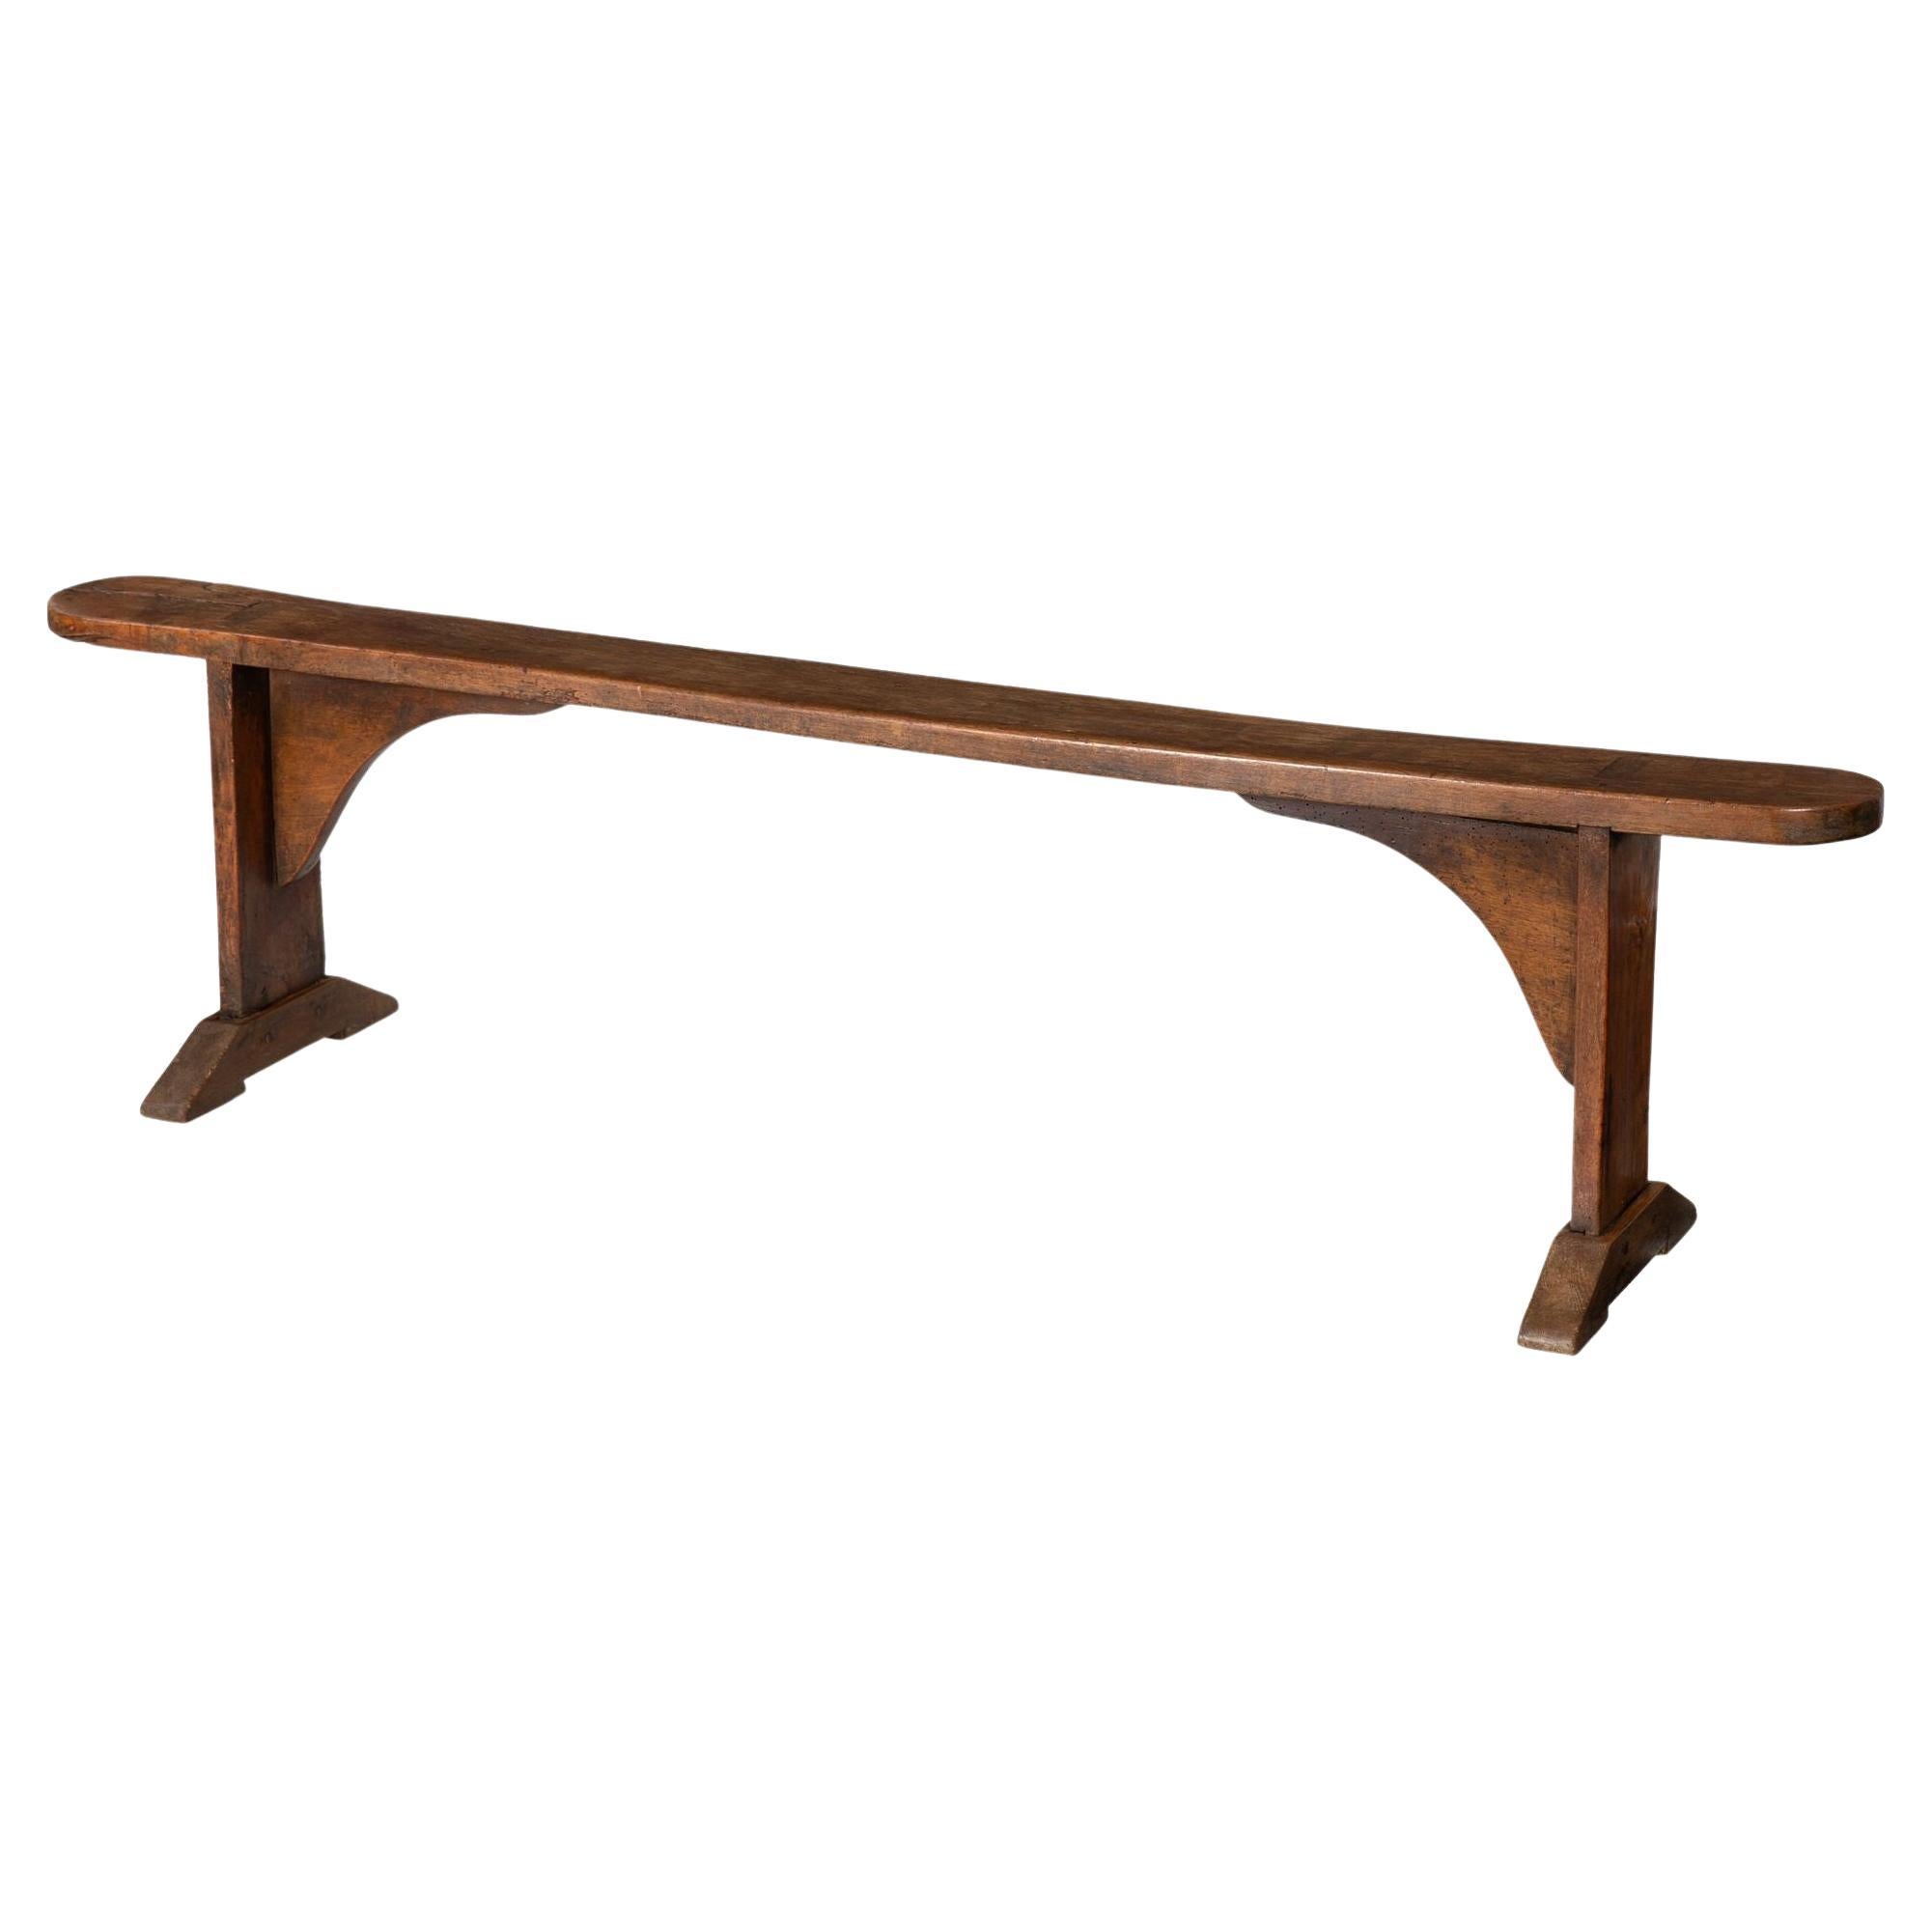 Mid-18th Century English Patinated Elm Long Trestle Bench For Sale